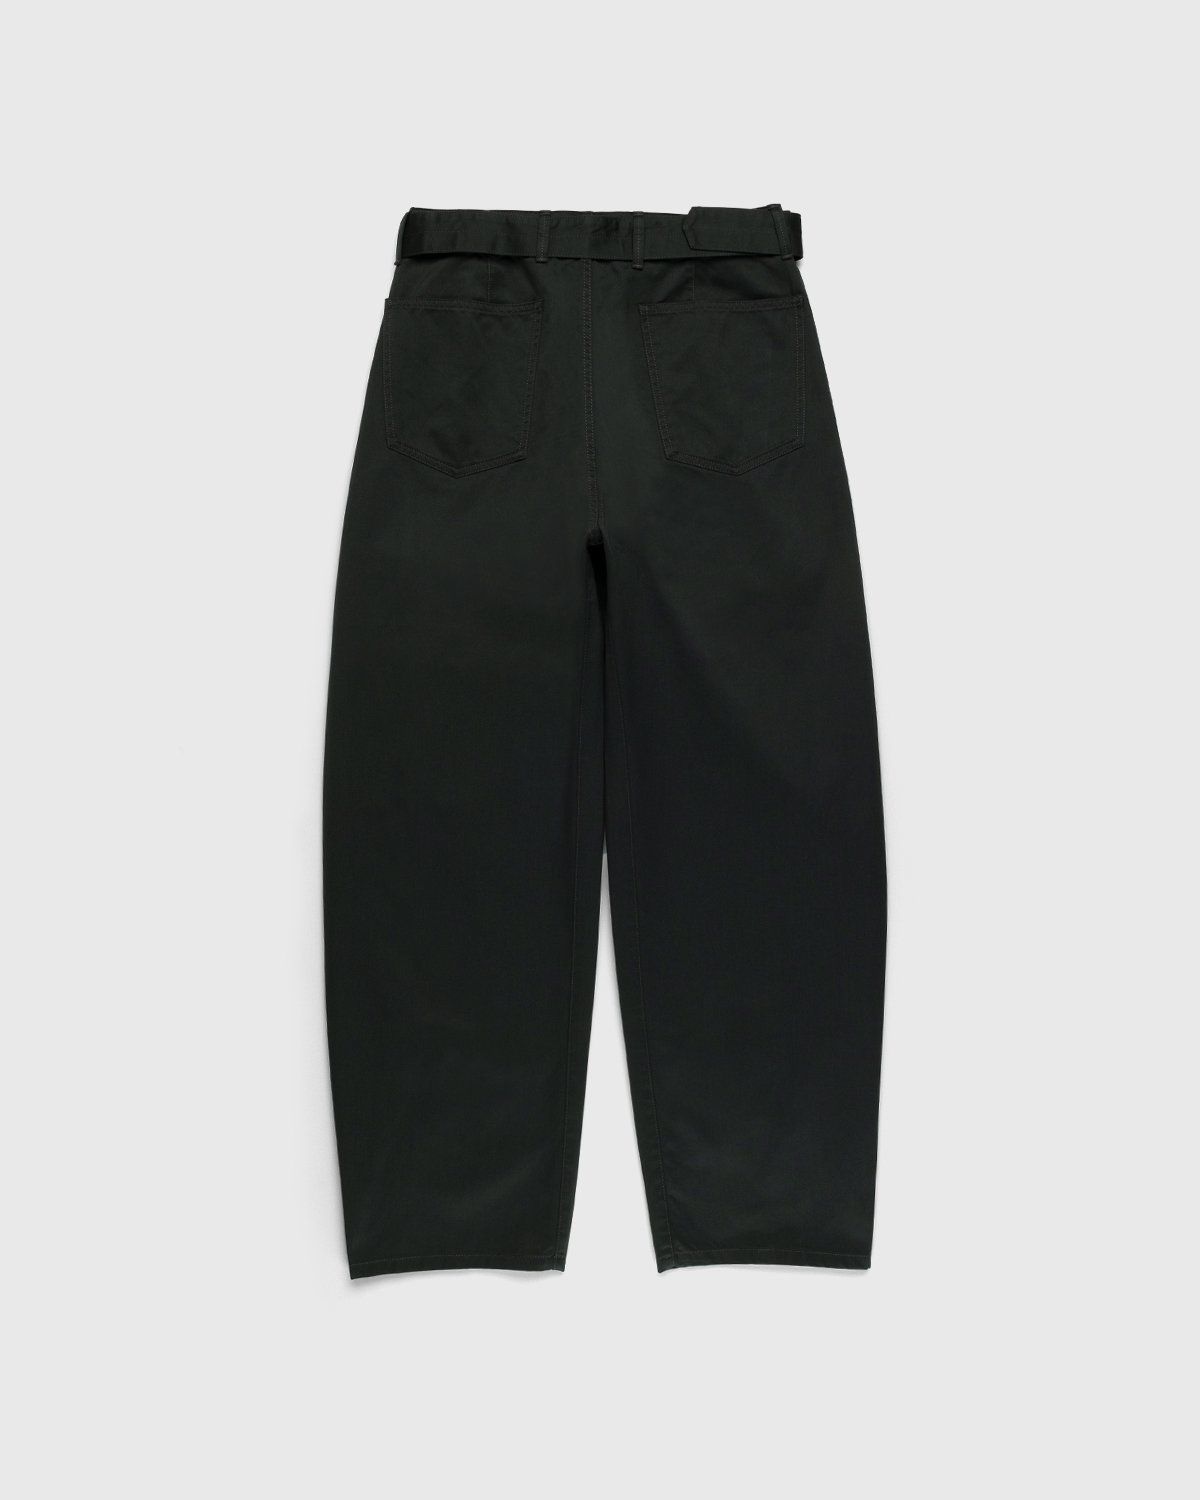 Lemaire – Twisted Belted Pants Dark Slate Green - Pants - Grey - Image 2